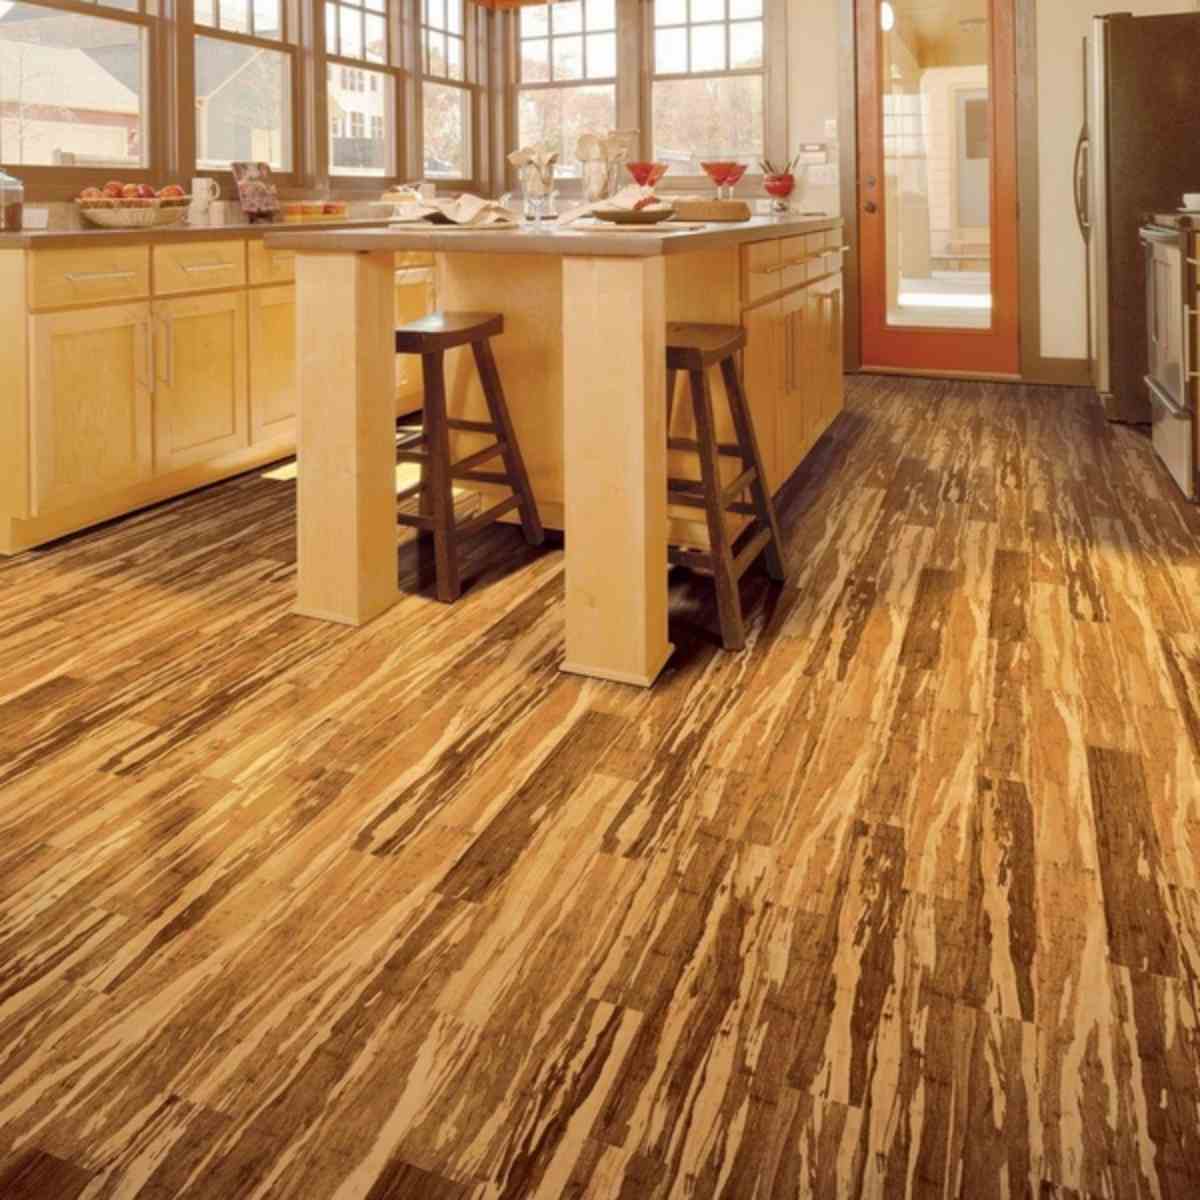 Pros And Cons Of Bamboo Floor Decor, What Are The Advantages And Disadvantages Of Bamboo Flooring